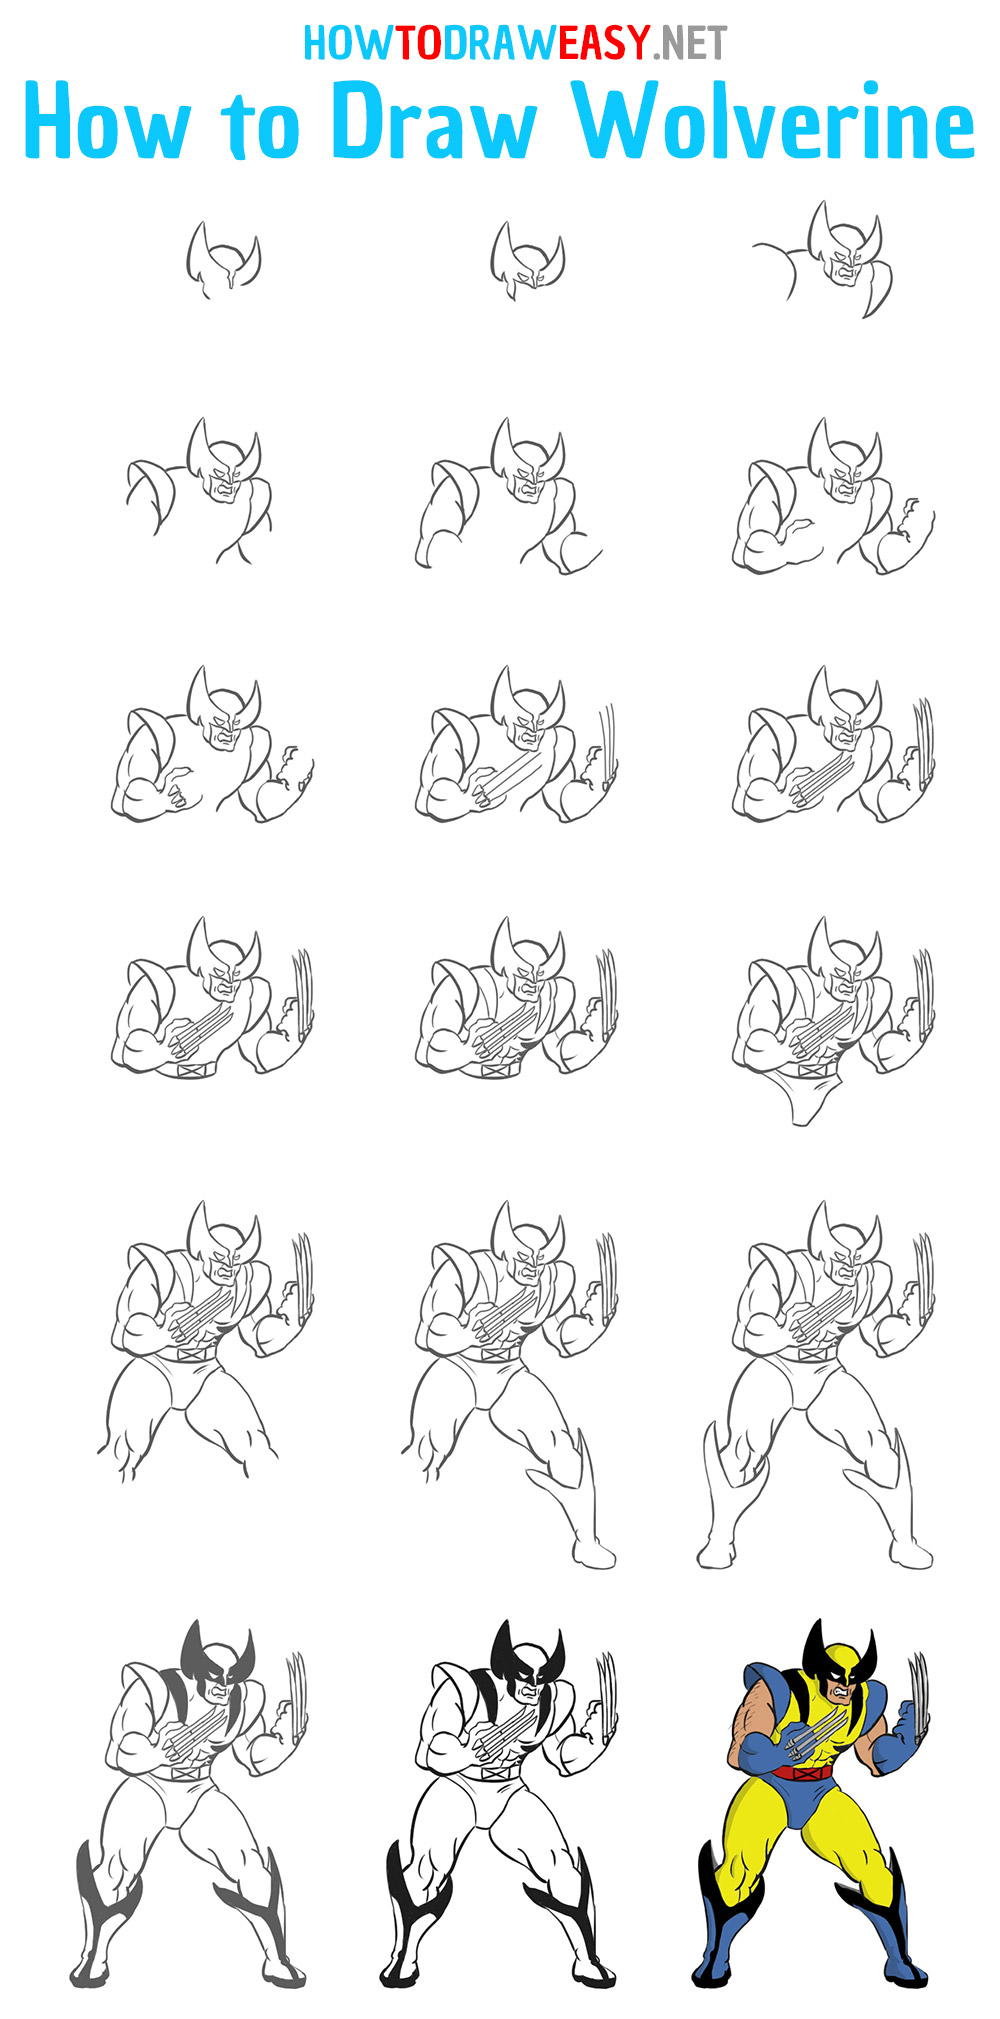 How to Draw Wolverine Step by Step